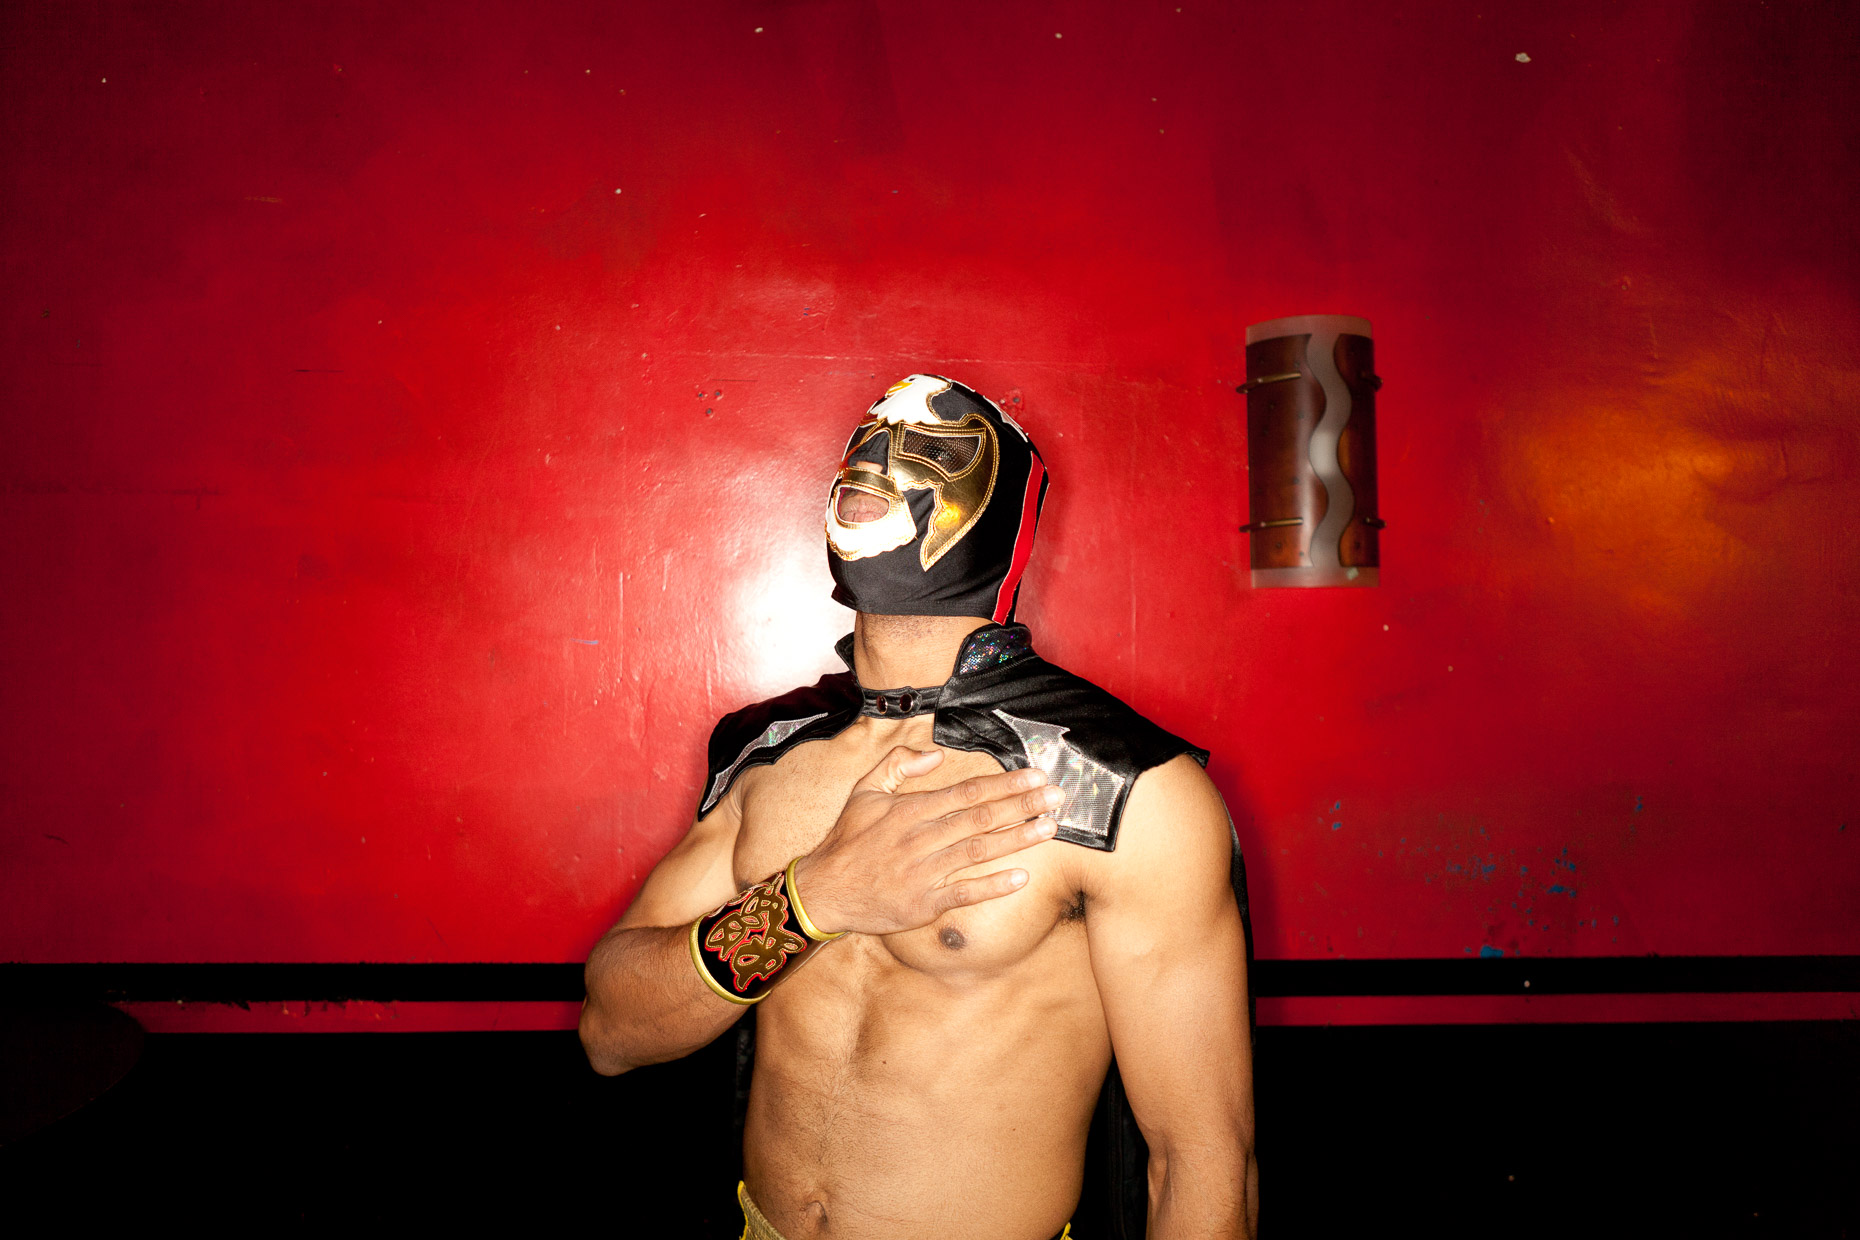 Lucha Vavoom Mexican wrestling and burlesque show in Los Angeles by David Zaitz